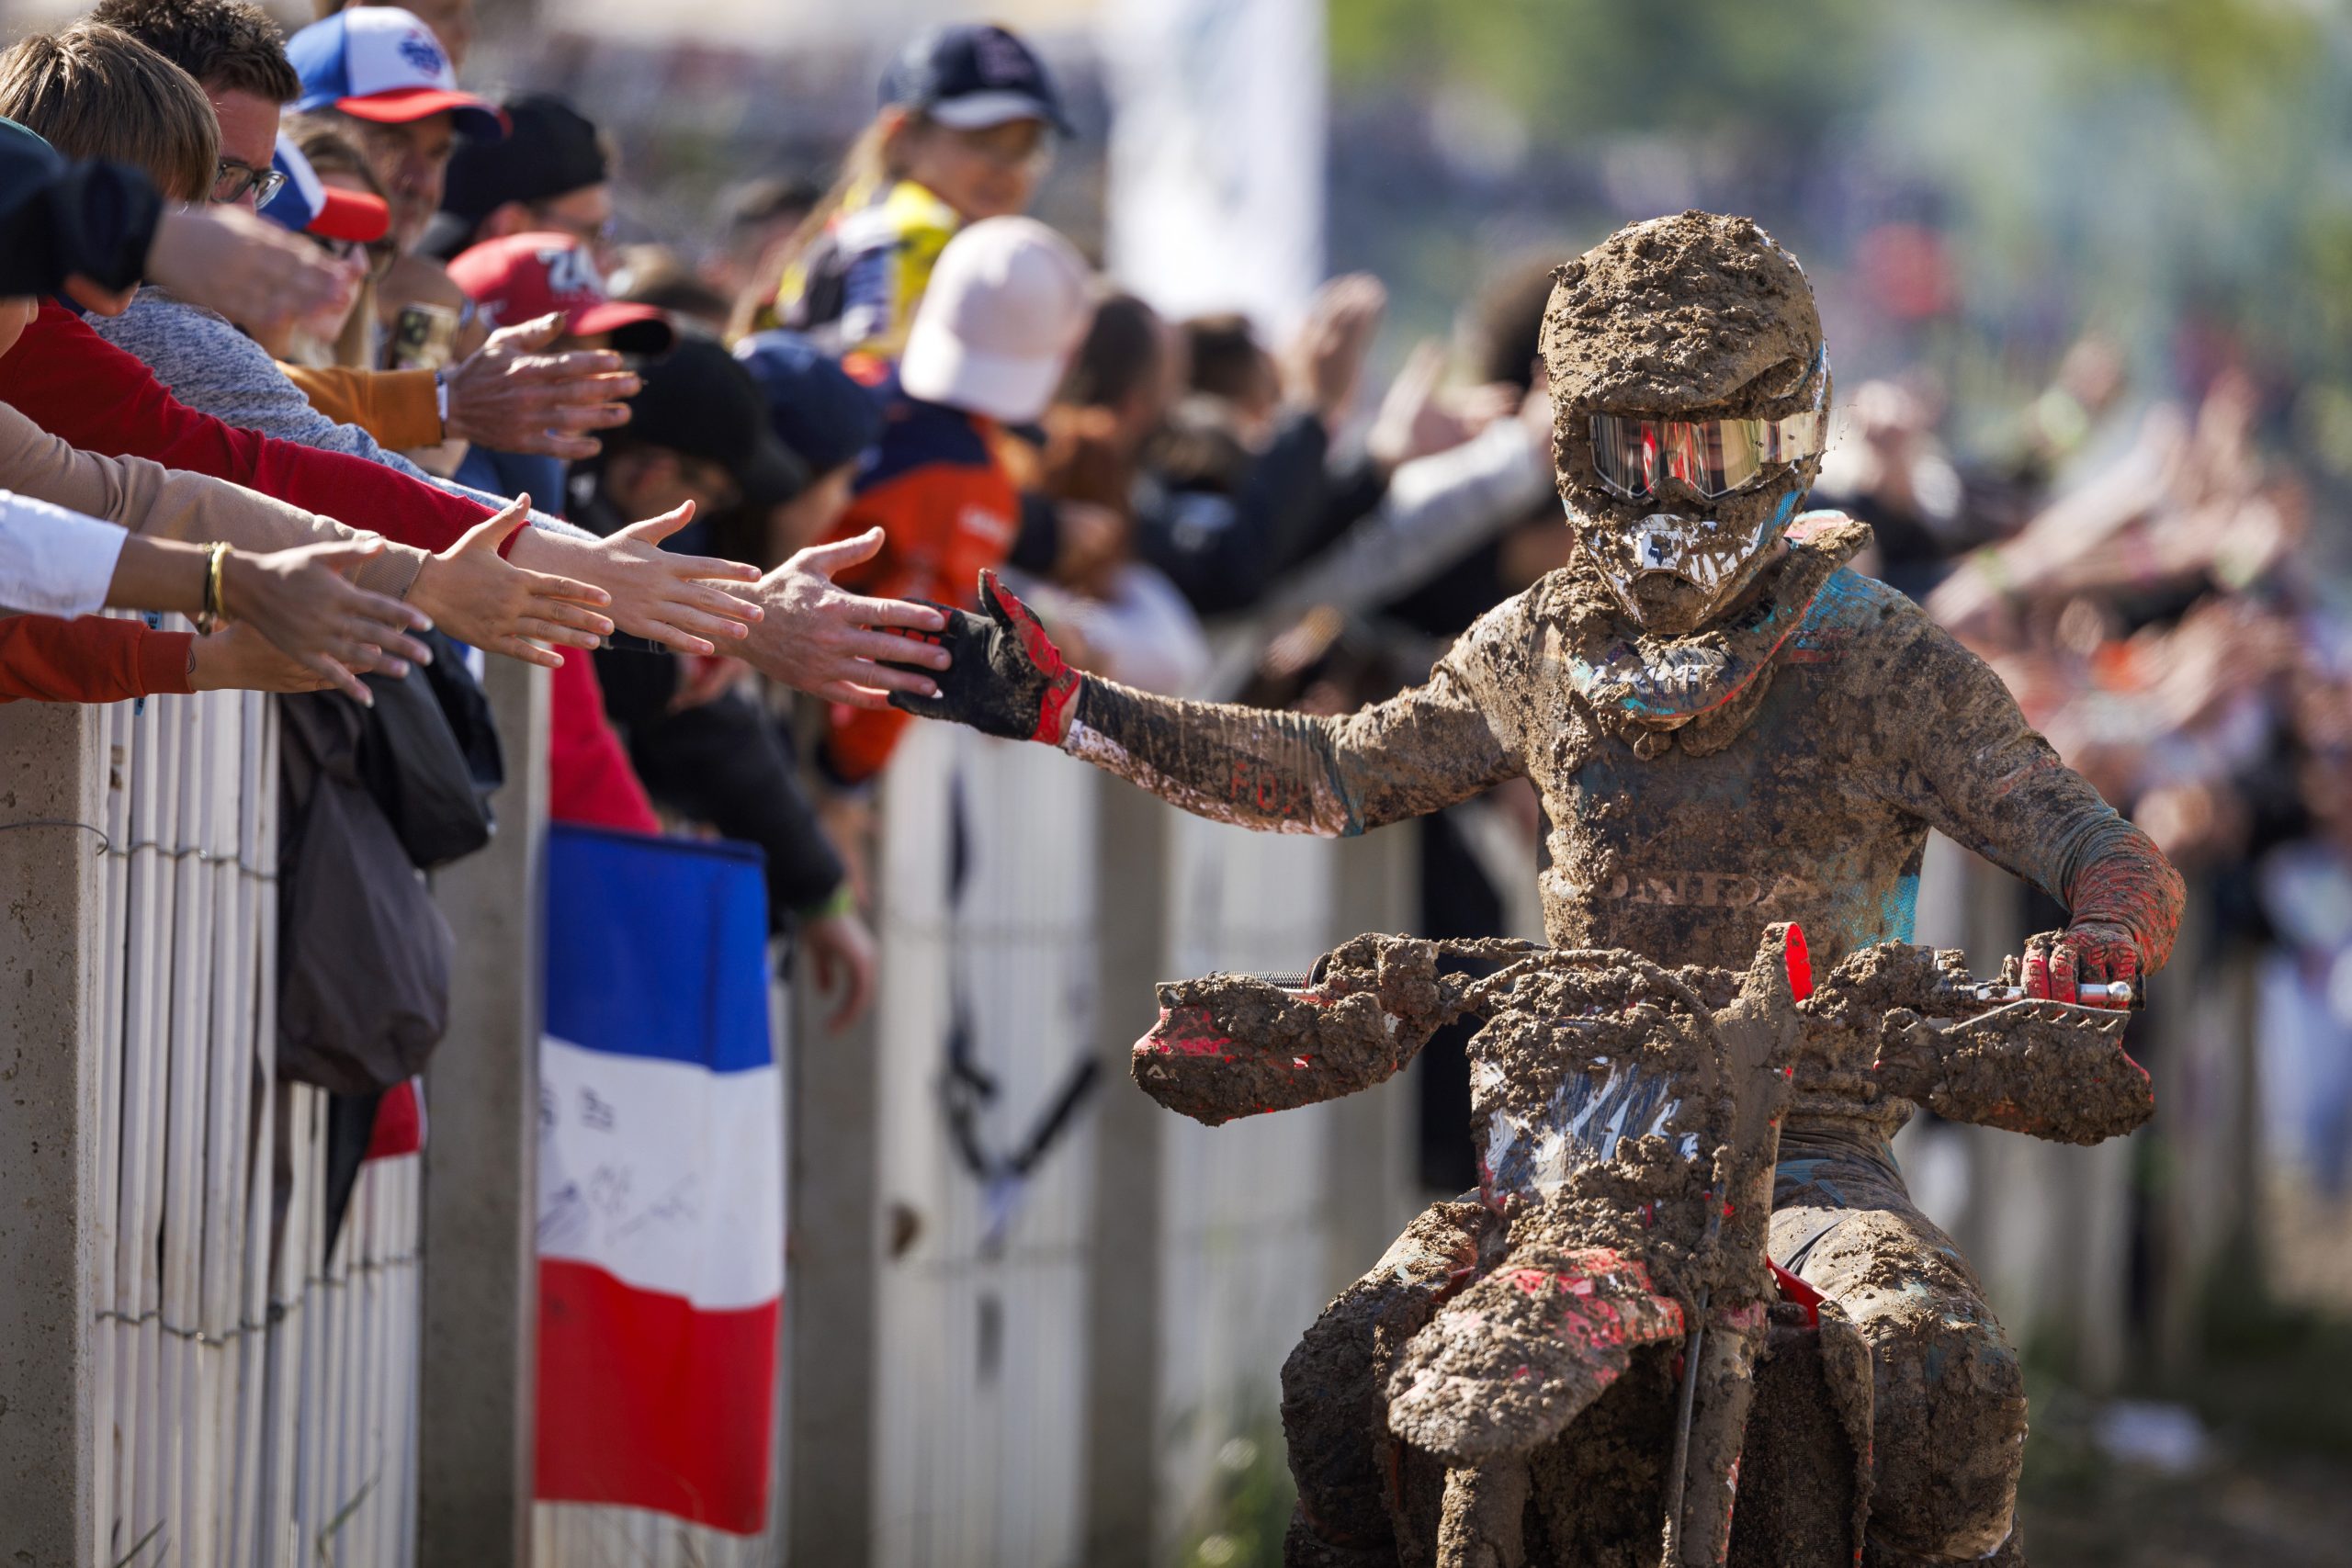 Championship all-square as Gajser shows mud skills in St Jean D’Angely